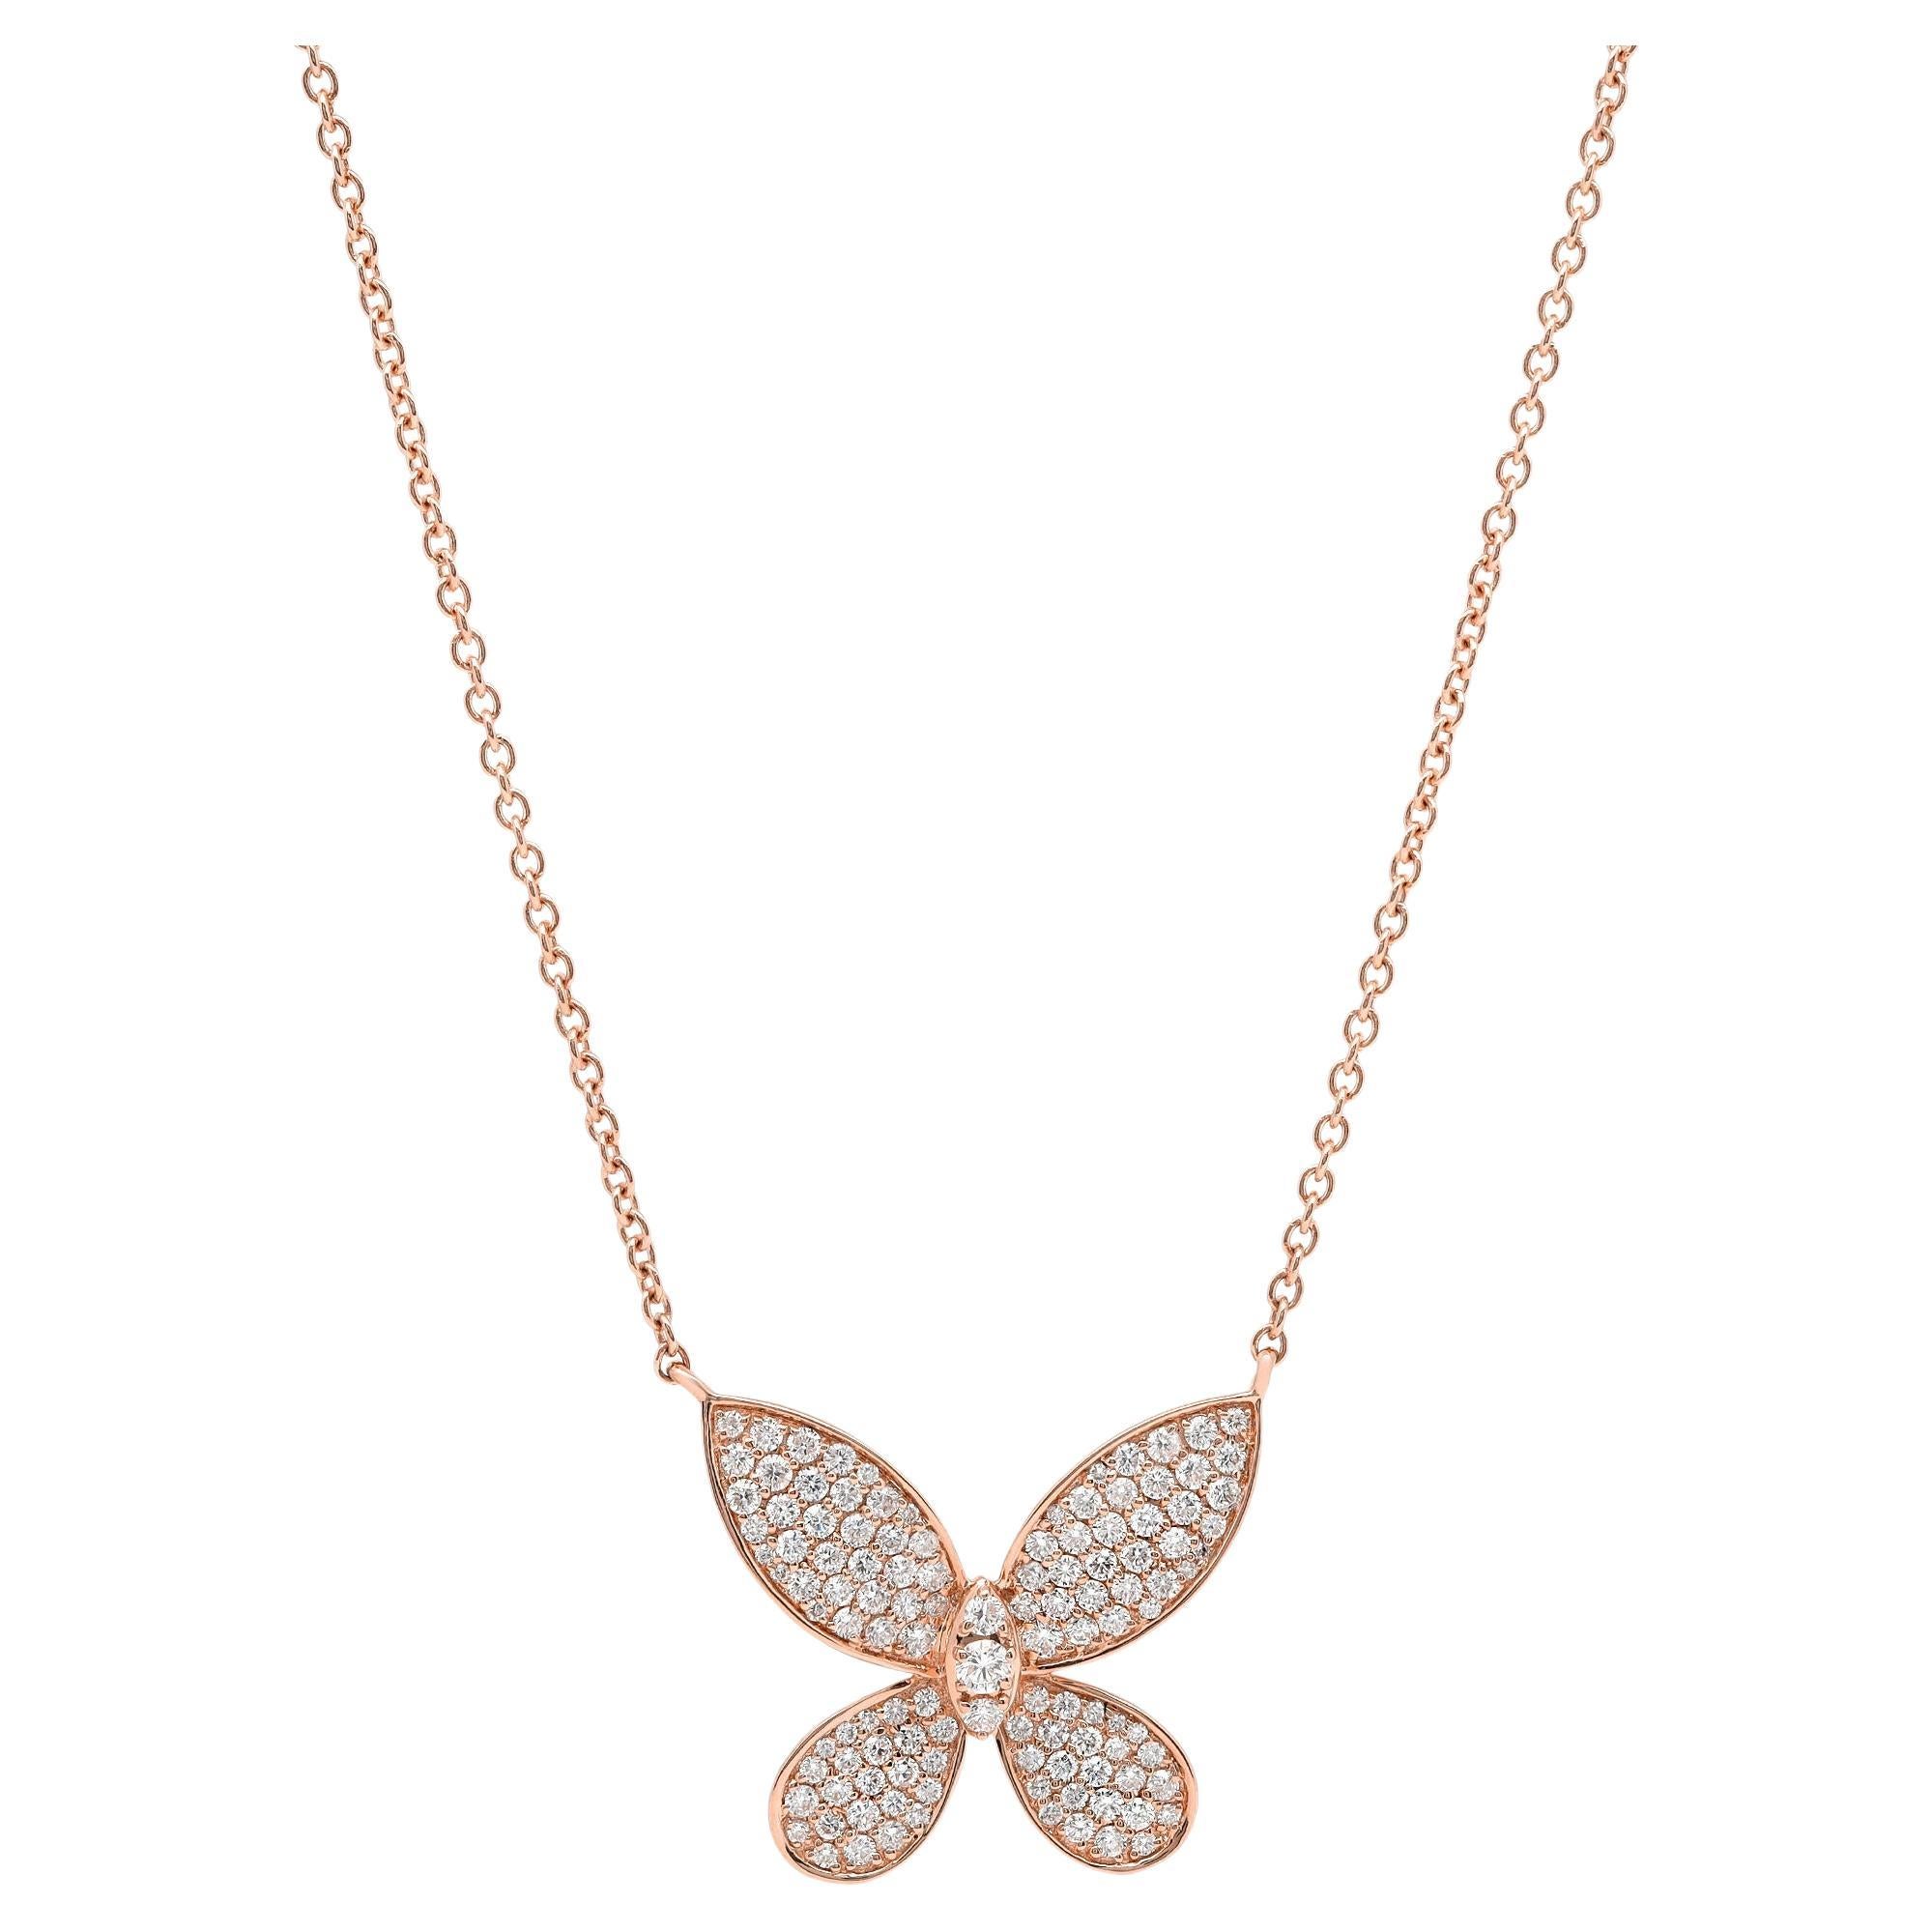 1.01cttw Pave Set Round Cut Diamond Butterfly Pendant Necklace 18K Rose Gold For Sale